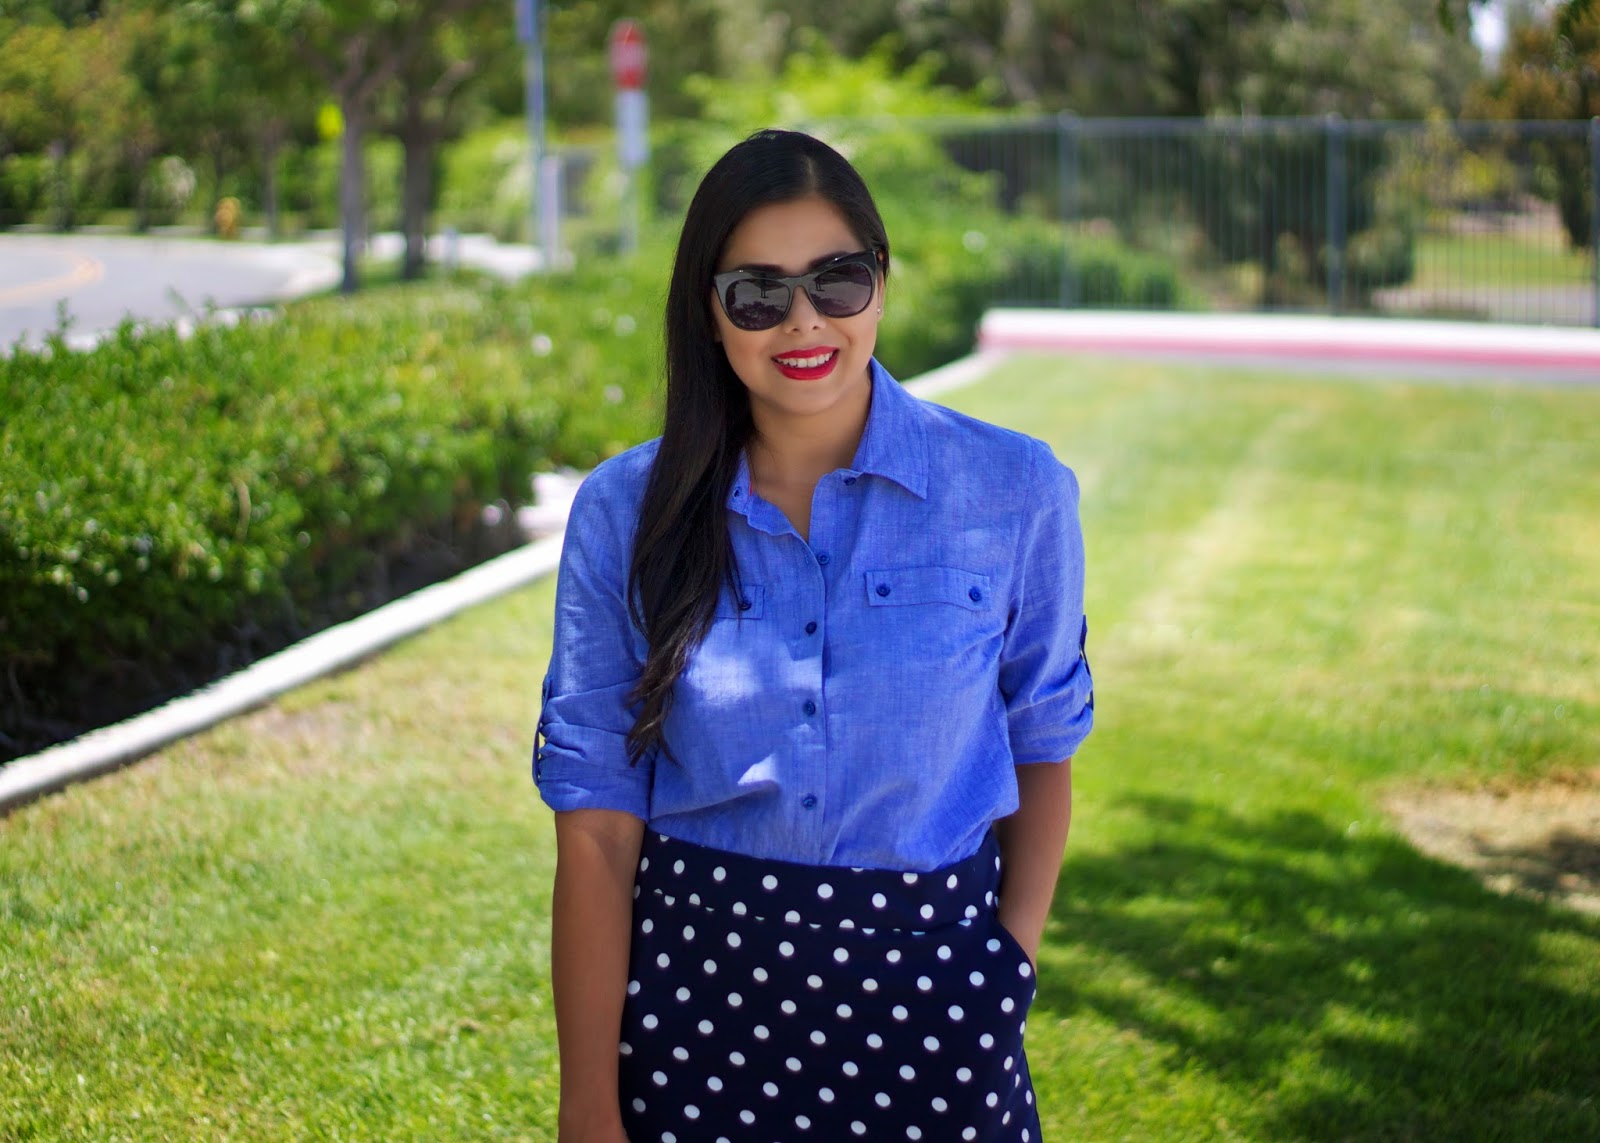 Red White and Blues - Lil bits of Chic